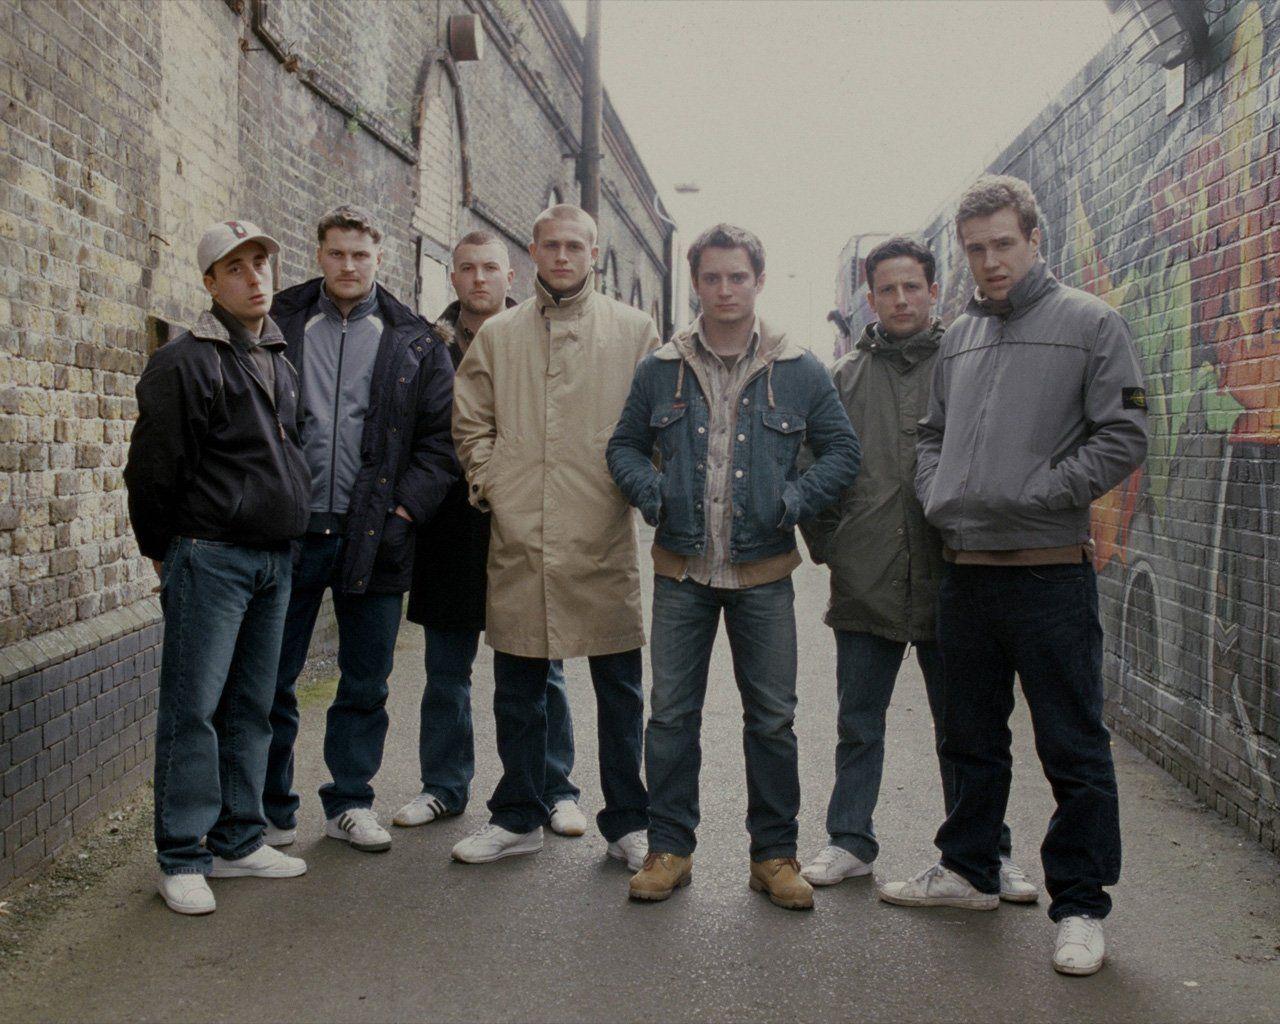 Green Street Hooligans HD Wallpaper and Background Image